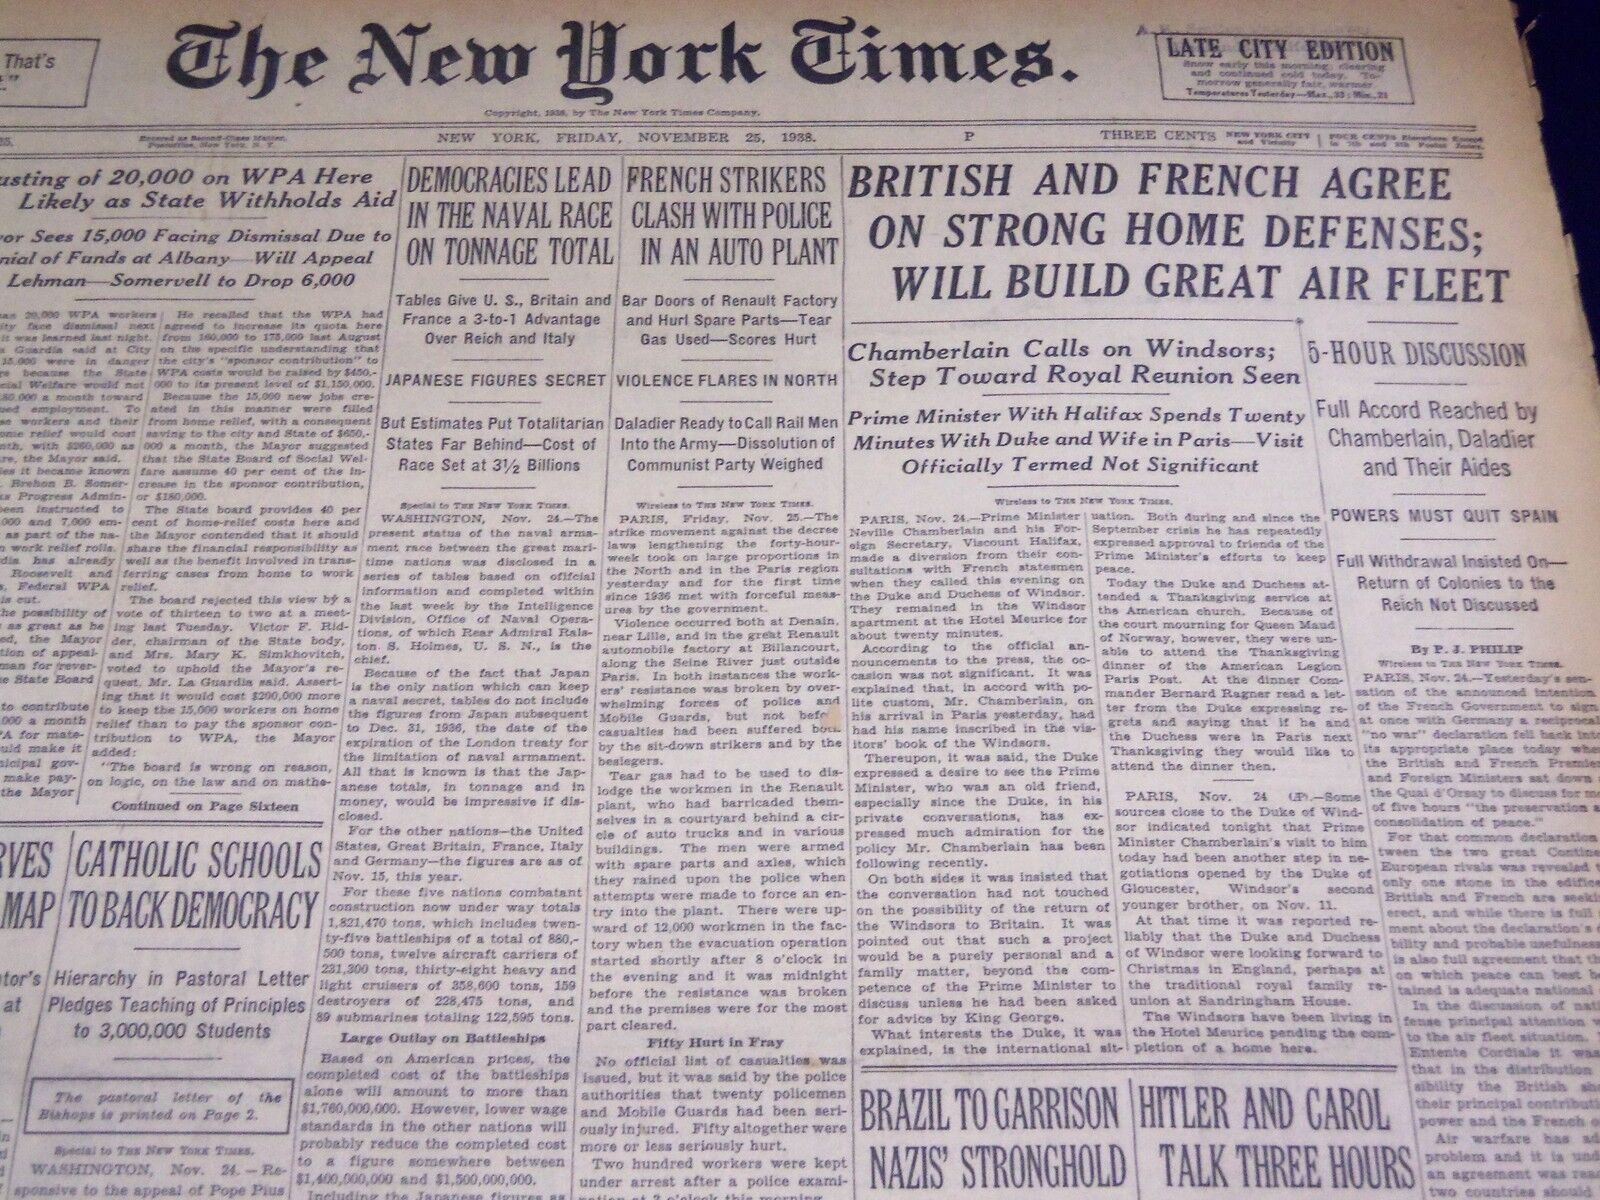 1938 NOV 25 NEW YORK TIMES - BRITISH & FRENCH AGREE ON STRONG DEFENSES - NT 2403